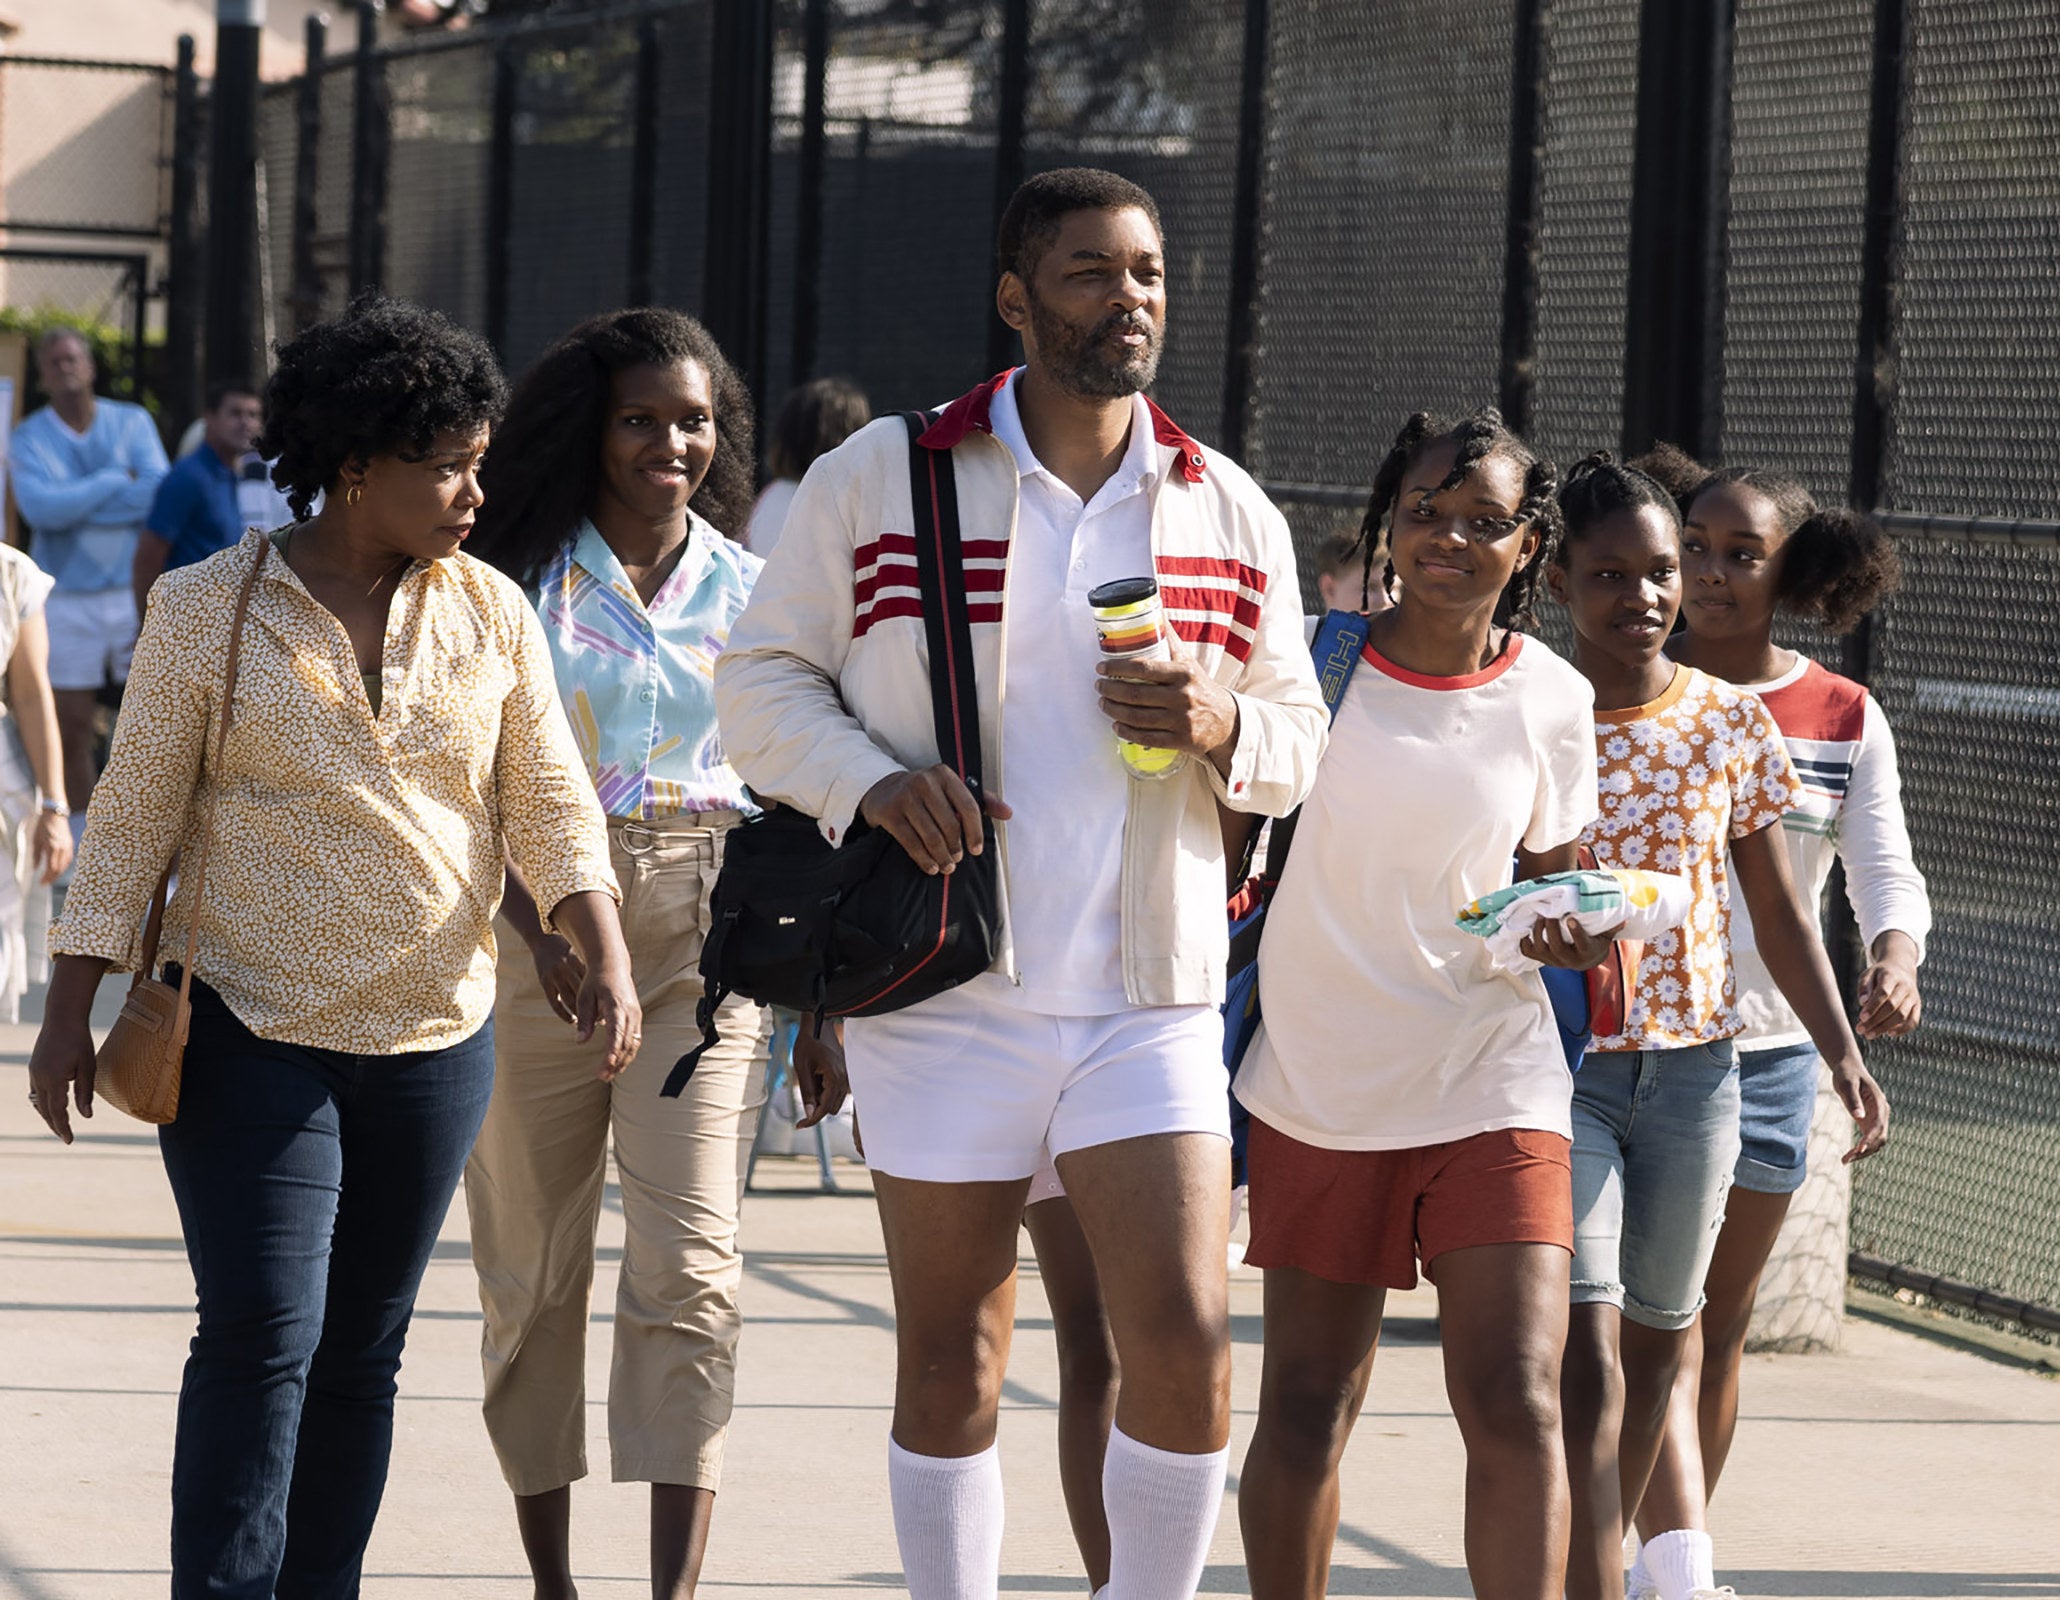 The family walking by tennis courts